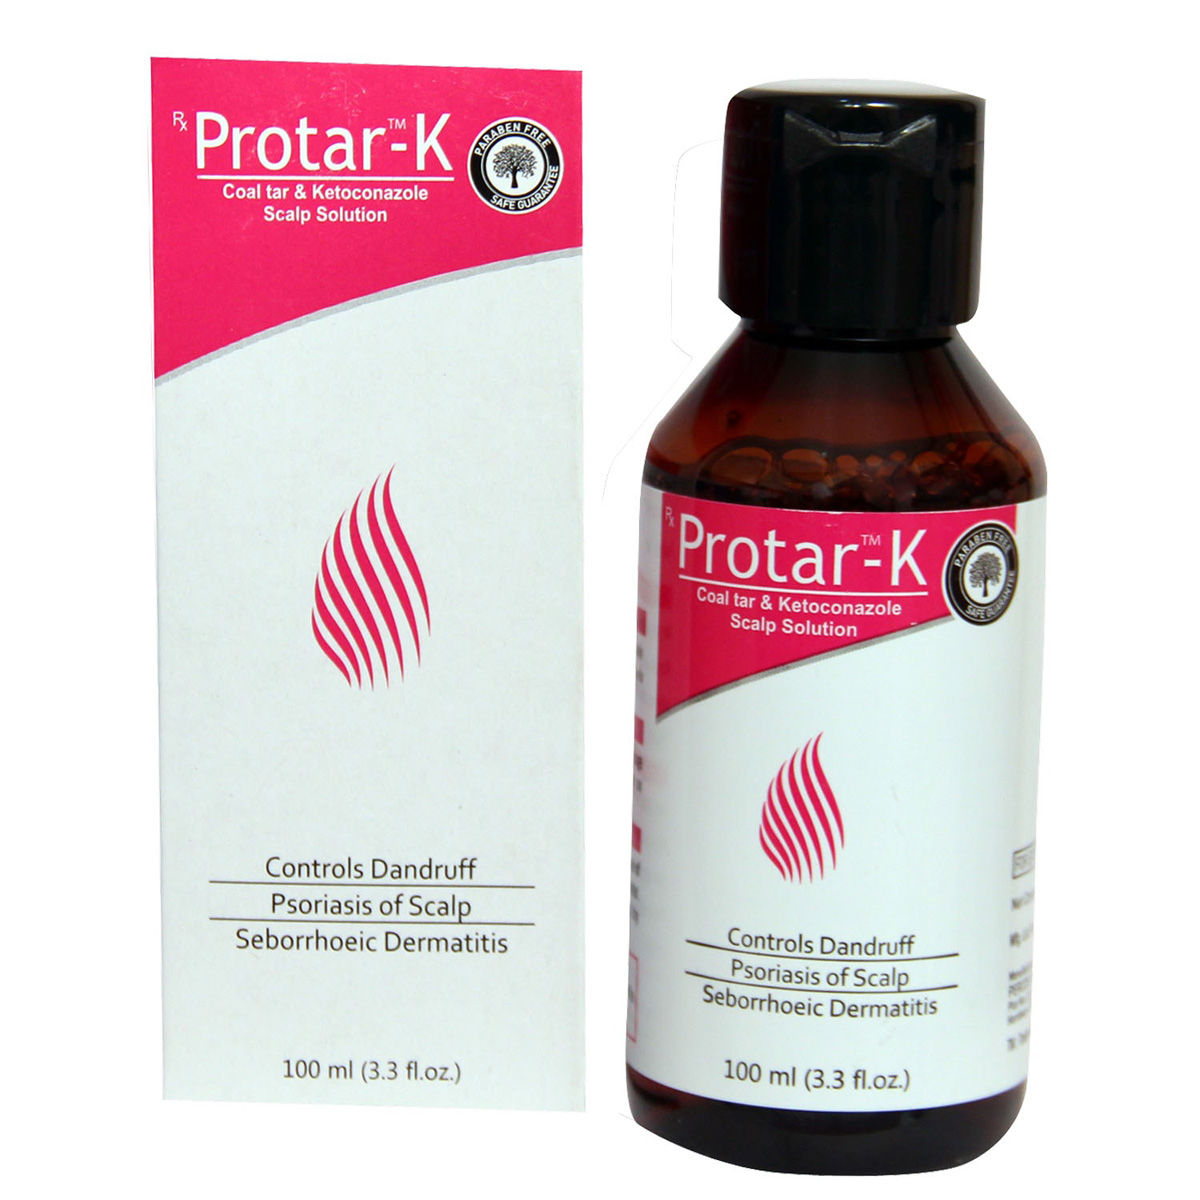 Protar-K Solution 100 ml Price, Uses, Side Effects, Composition ...